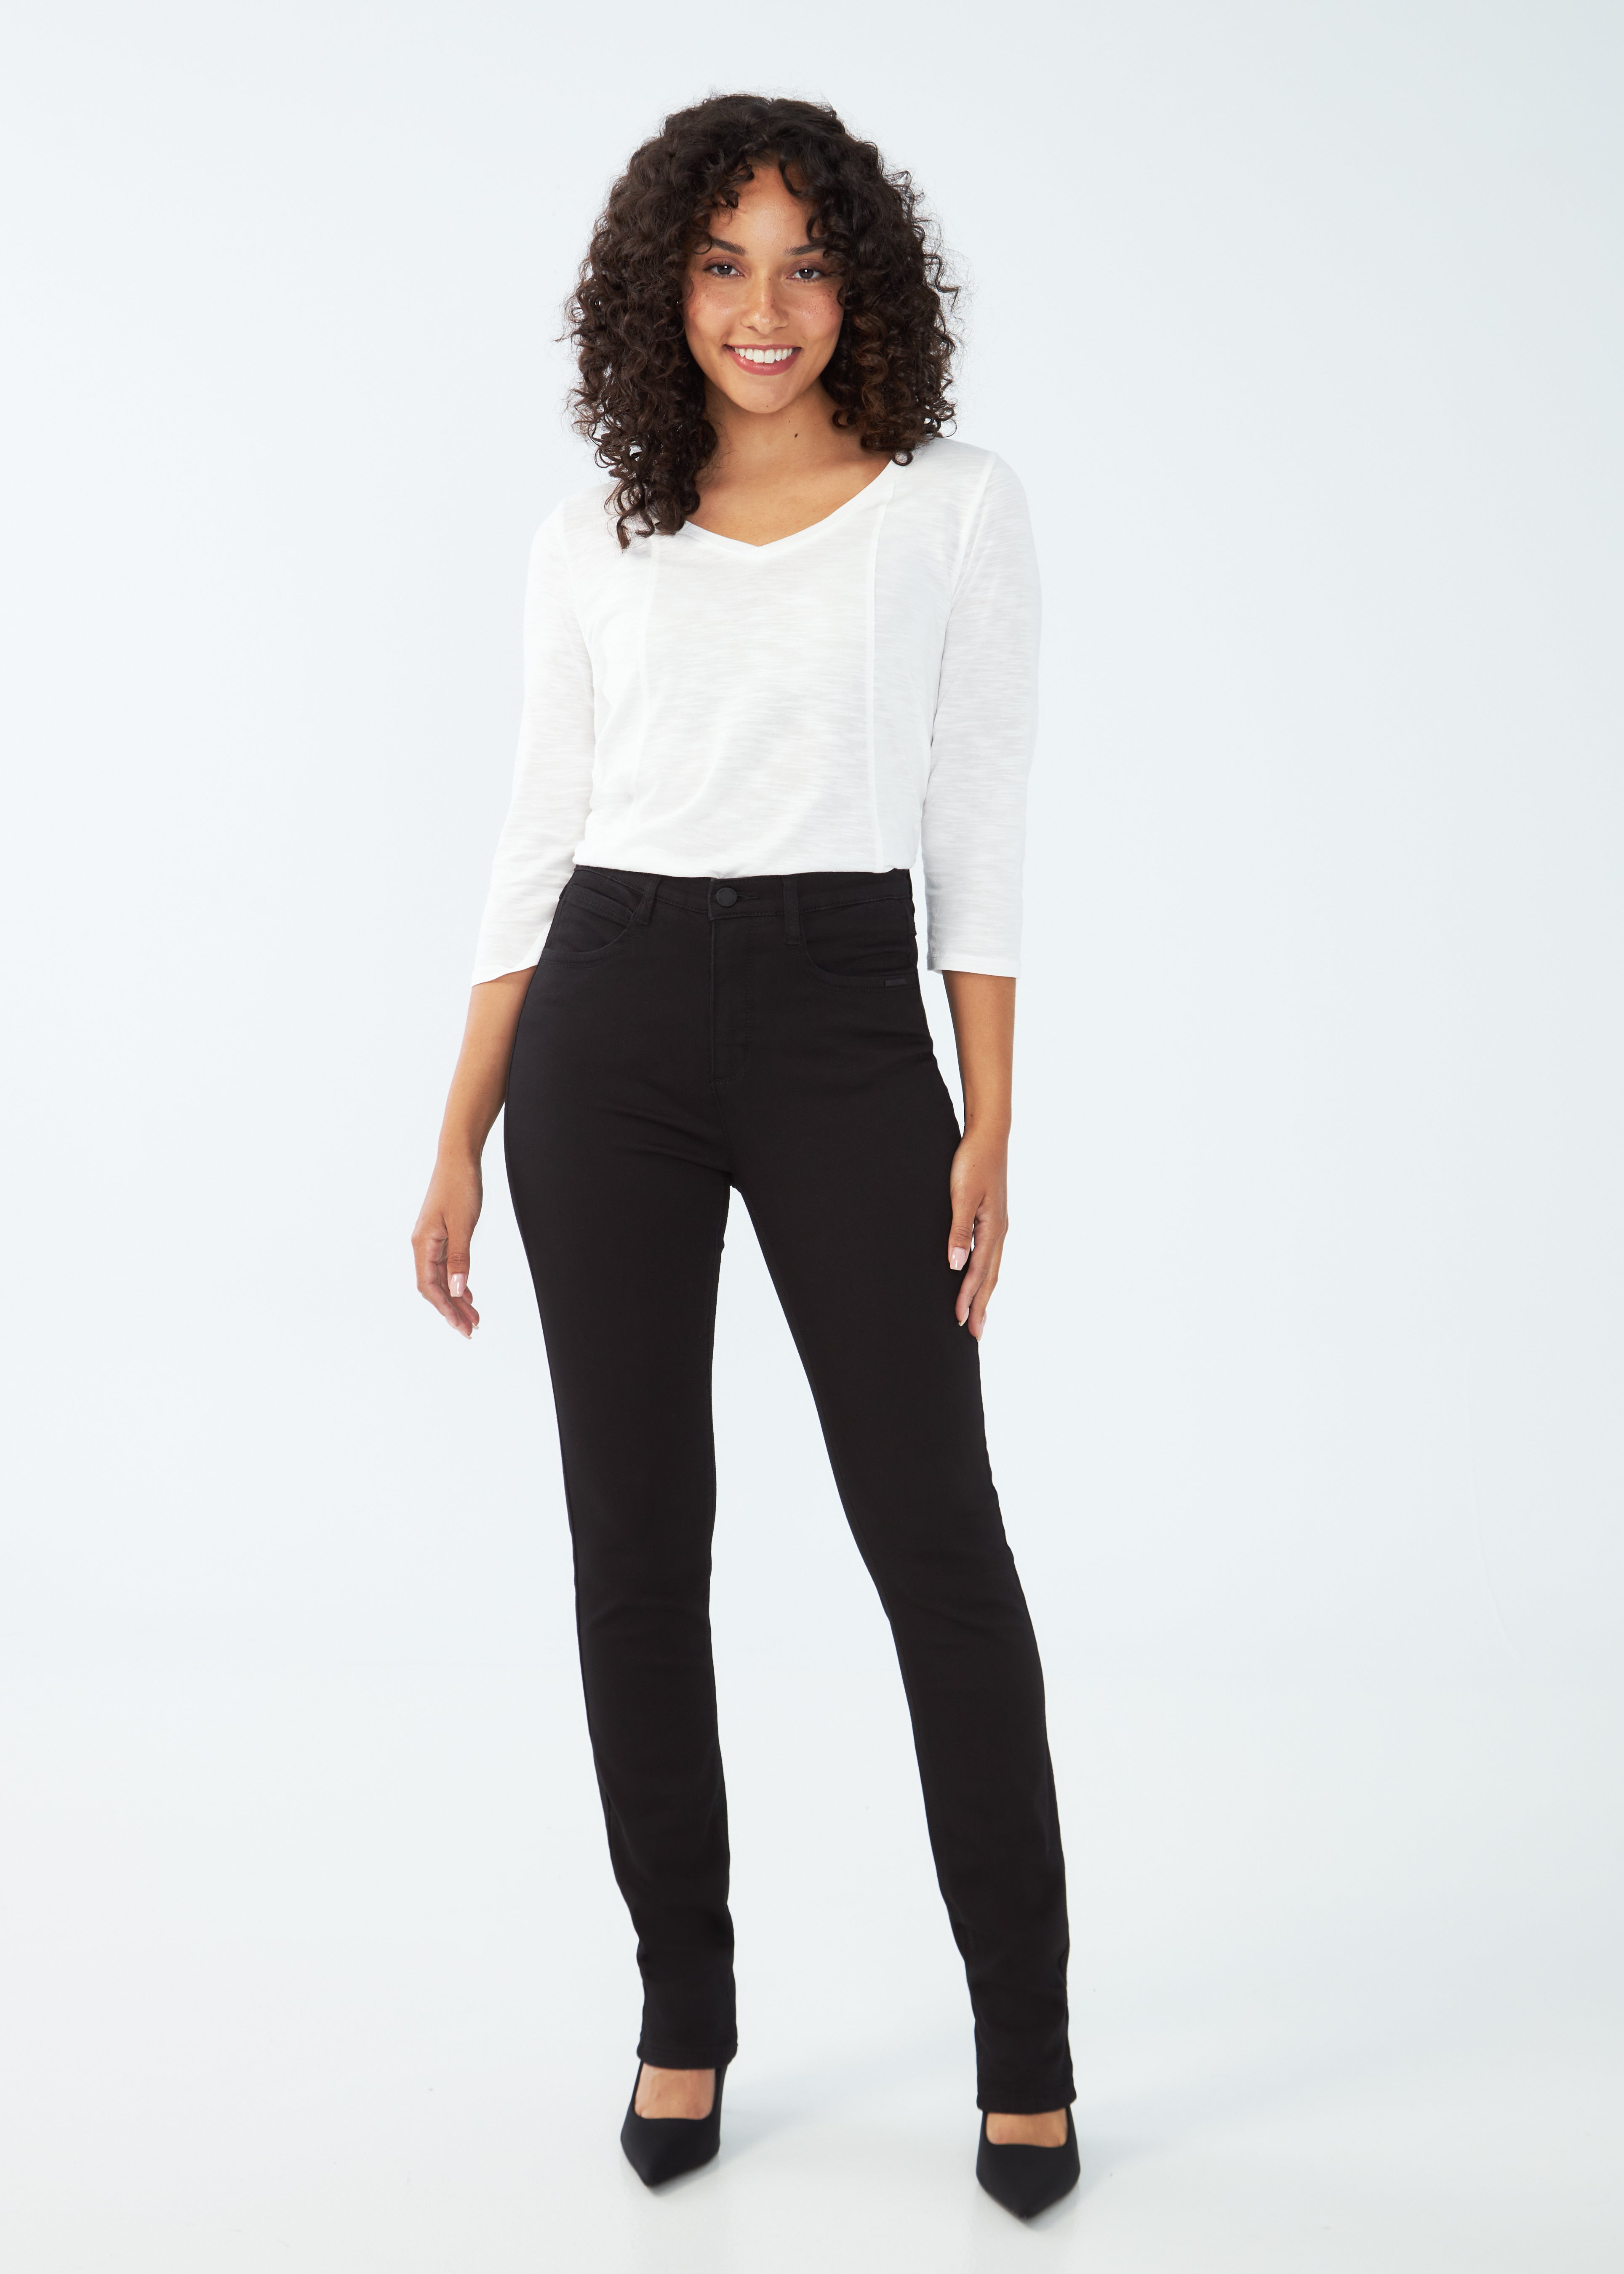 No wardrobe is complete without spectacular black jeans! For women with slimmer curves, consider our super-flattering Suzanne Onyx Denim.